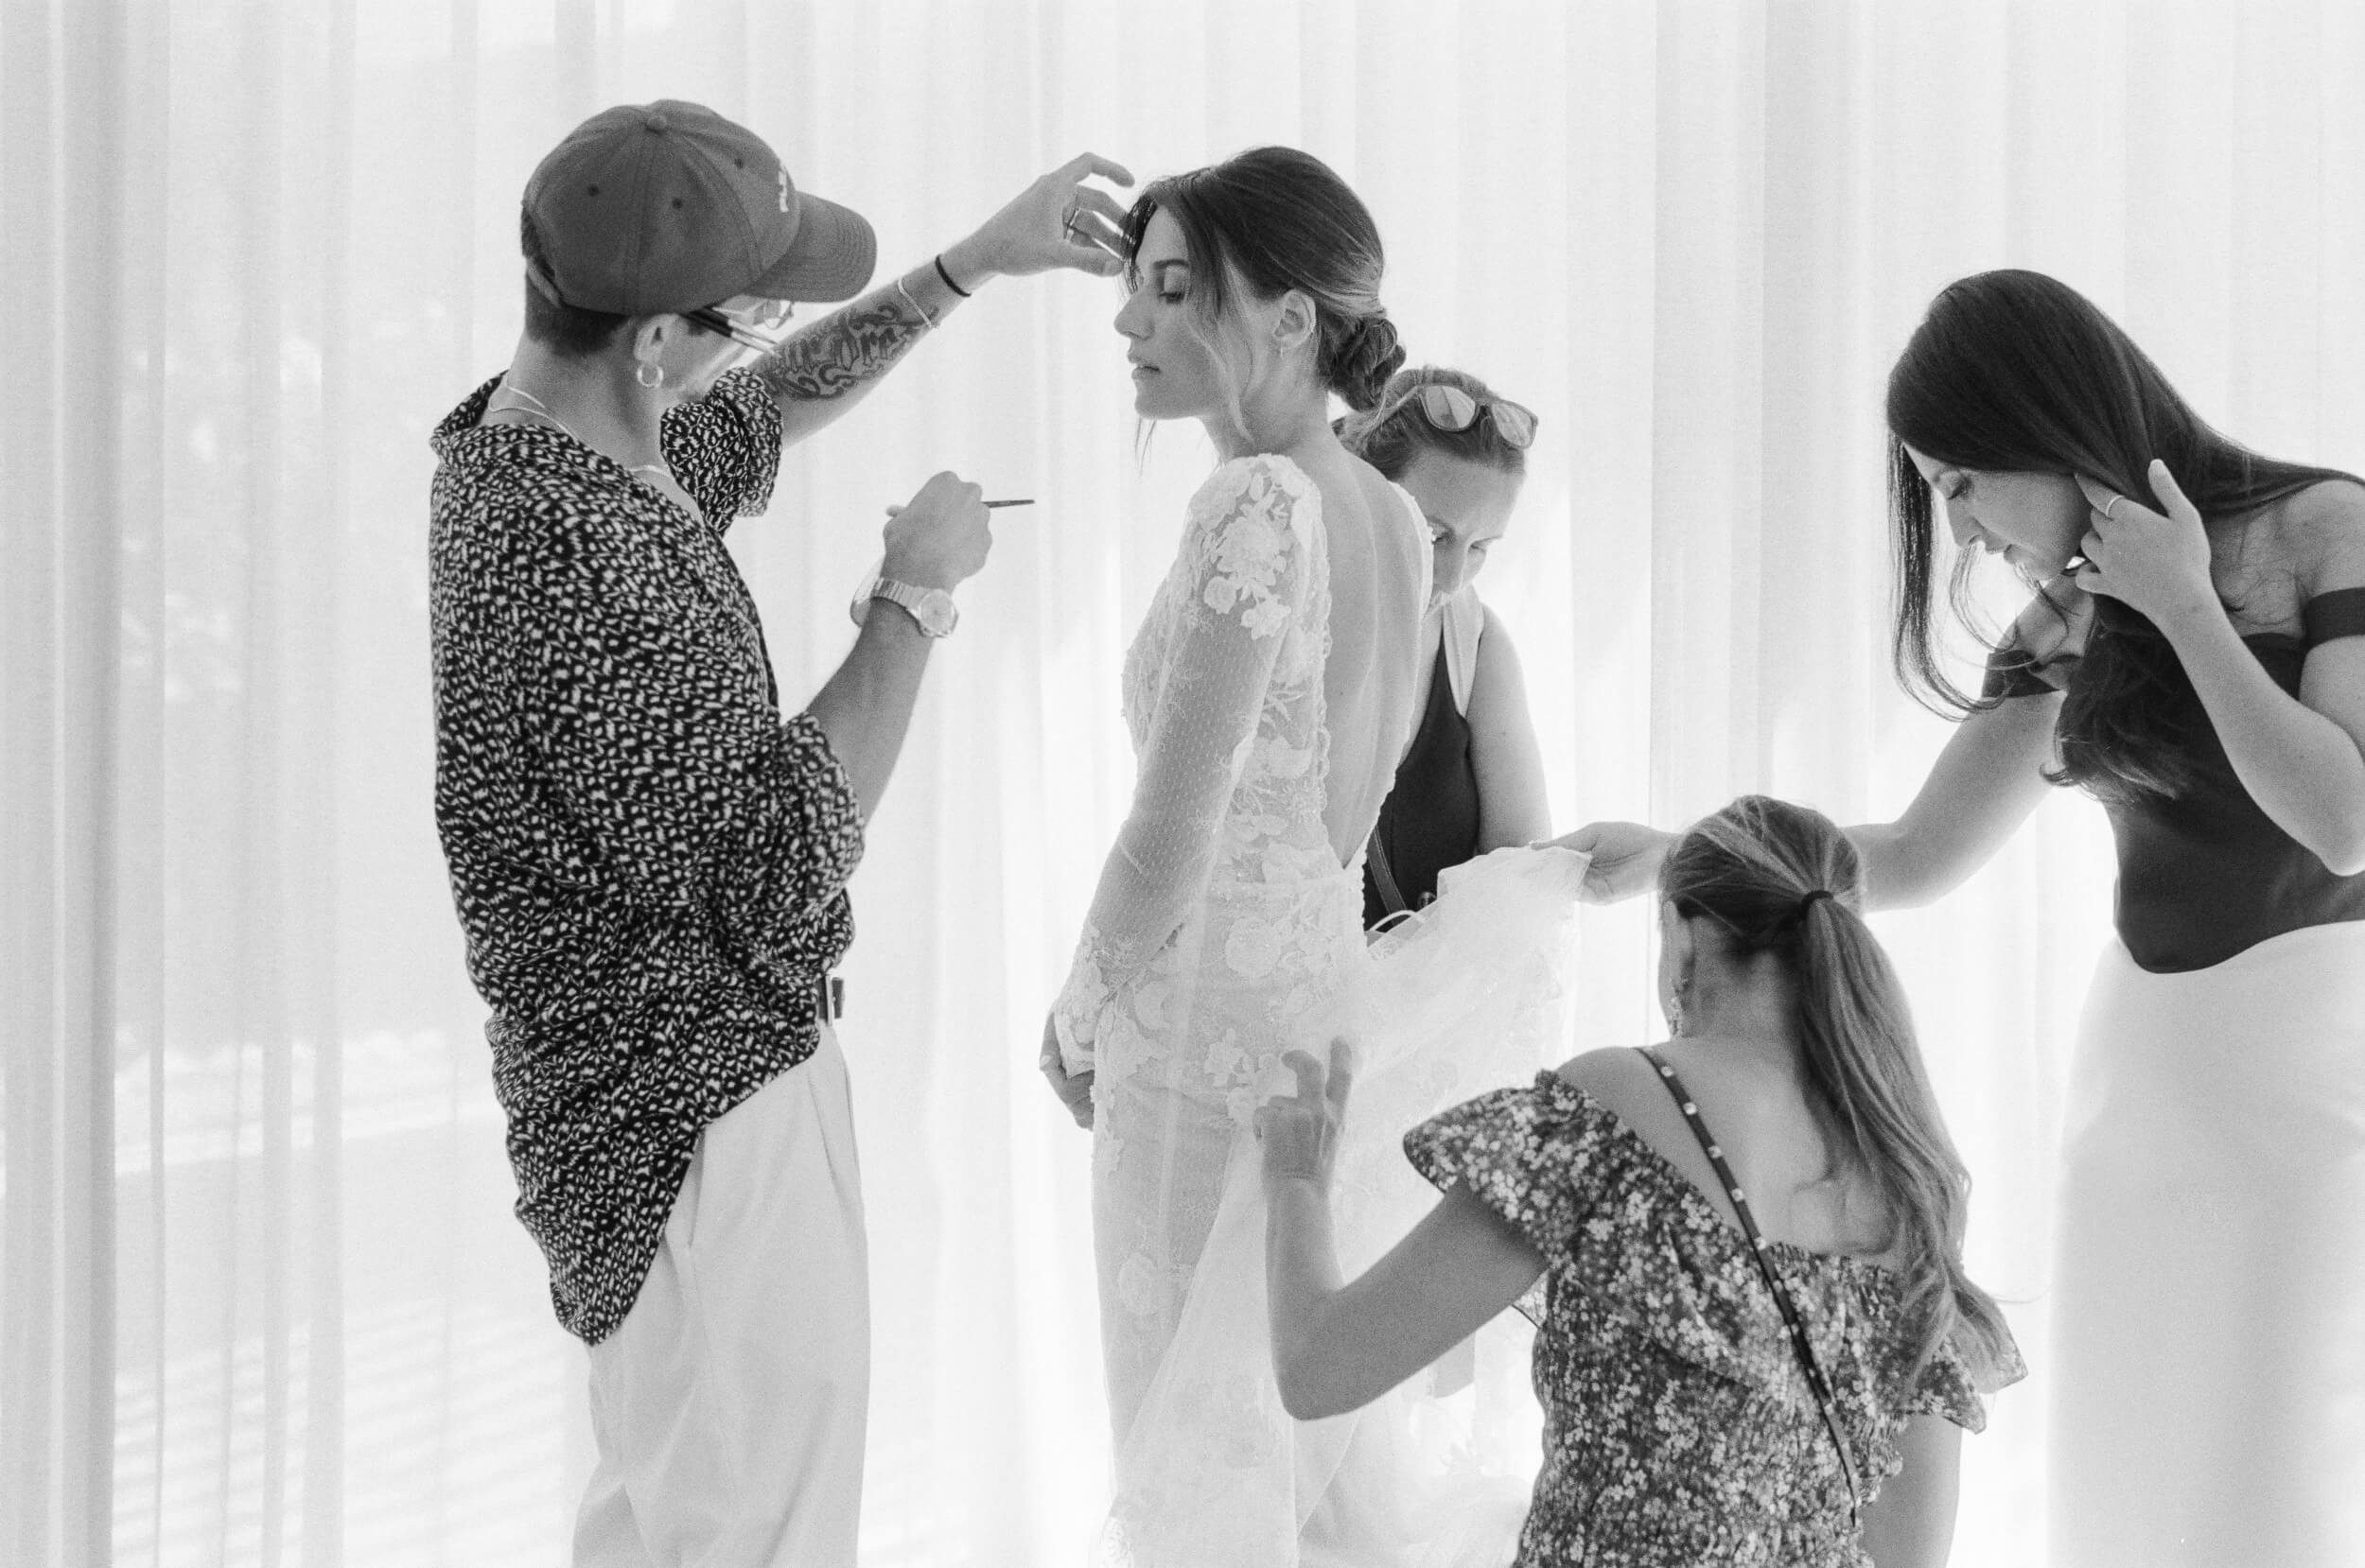 Olga's team getting her ready for the wedding ceremony